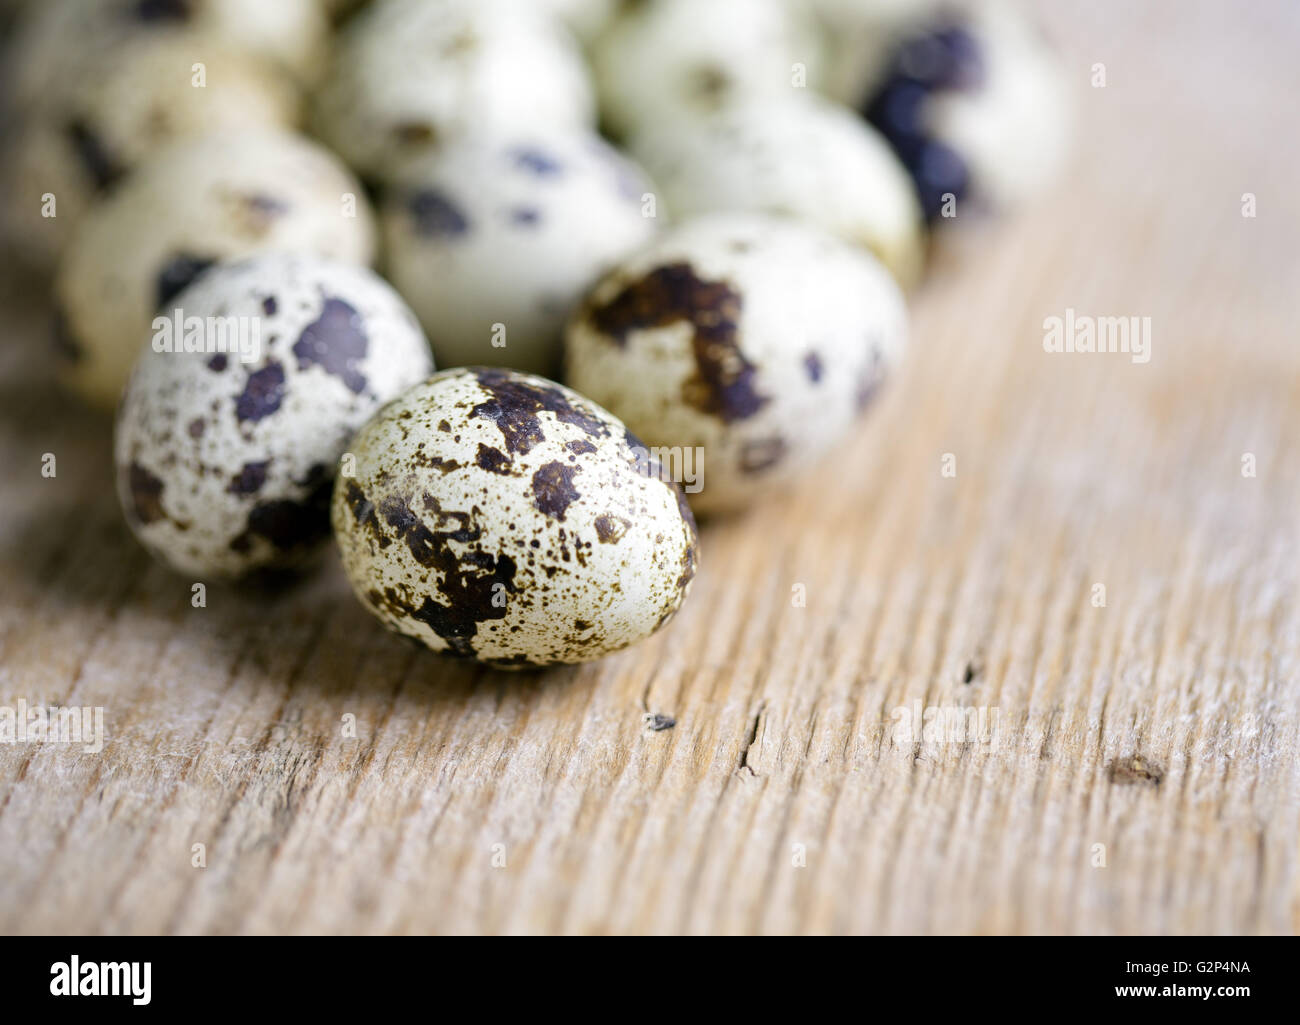 Frsh whole Quail Eggs wooden board on table Stock Photo